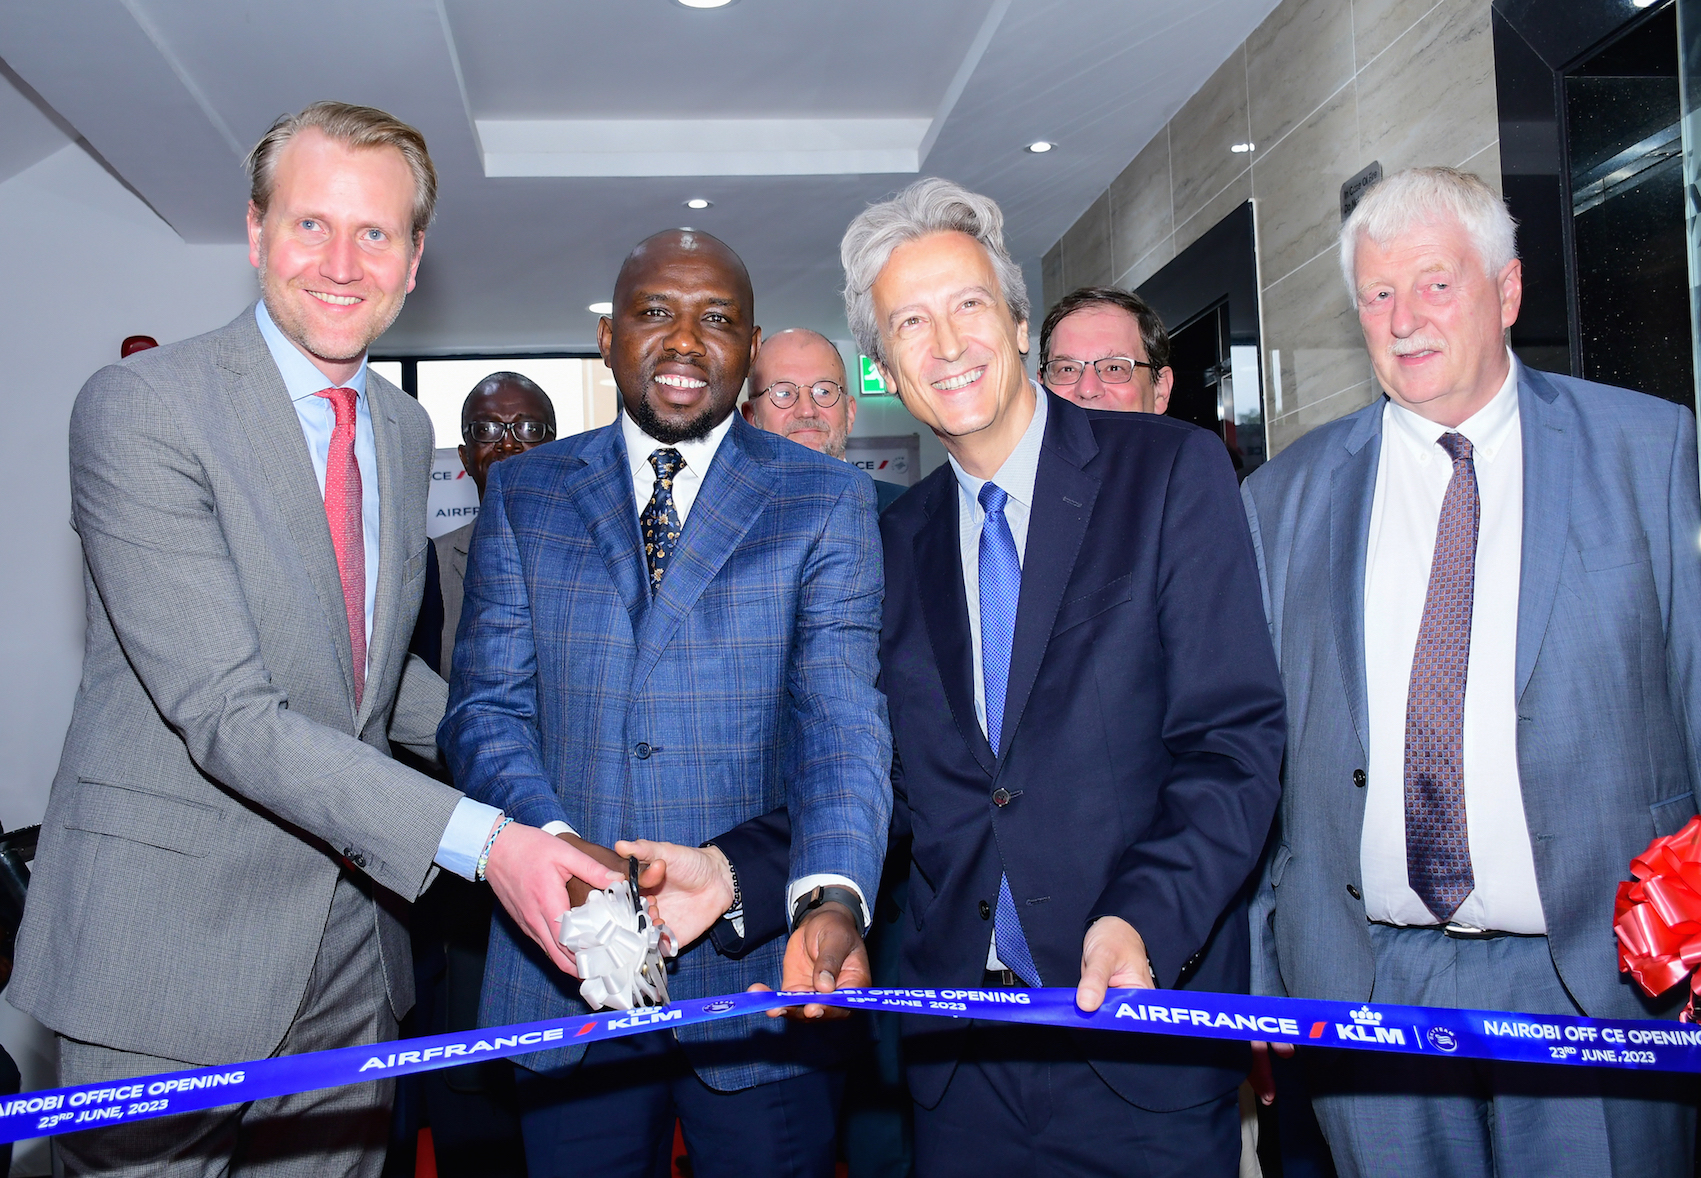 L-R, AirFrance KLM General Manager Nigeria, Ghana, East, and South Africa, Marius van der Ham, Transport Cabinet Secretary Kipchumba Murkomen, AirFrance KLM Group senior vice president long-haul Zoran Jelkic and Dutch Ambassador to Kenya, Hon Maarten Brouwer cut a ribbon marking the official opening of the Air France KLM African Region Headquarters at Merchant Square, Riverside Drive Nairobi. The office opening is part of the airline’s group strategic plan to bolster its network and enhance regional services.